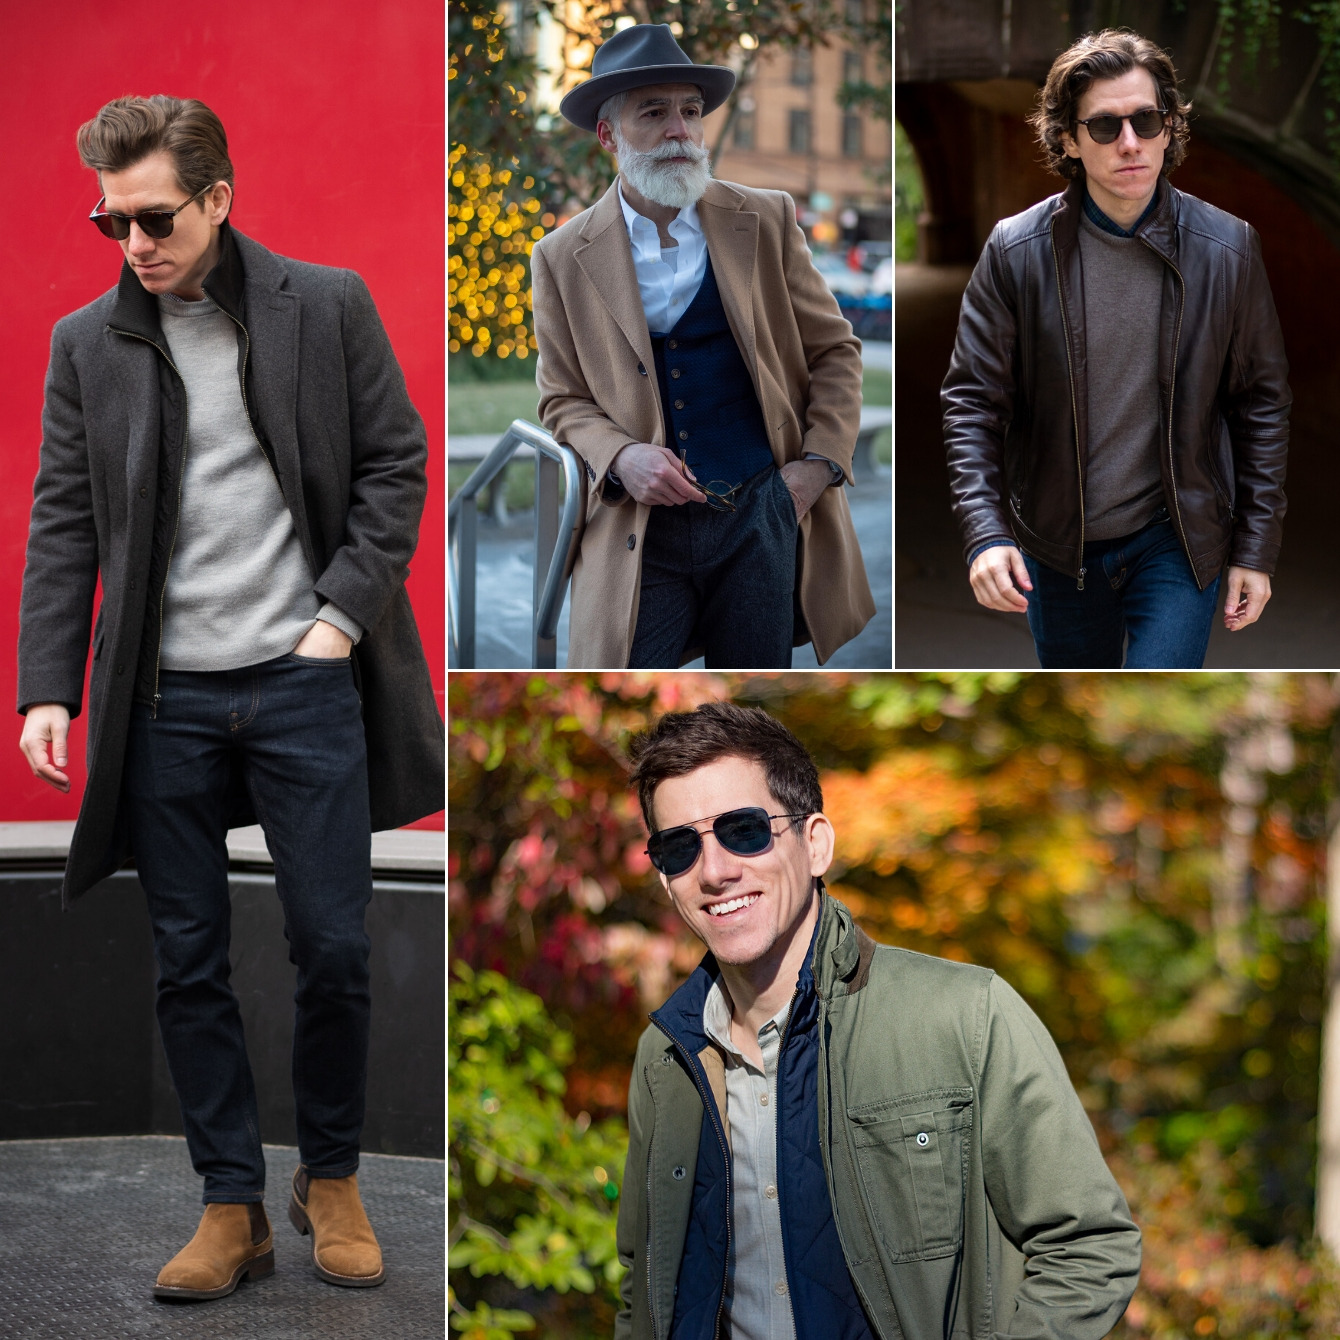 How to wear layers